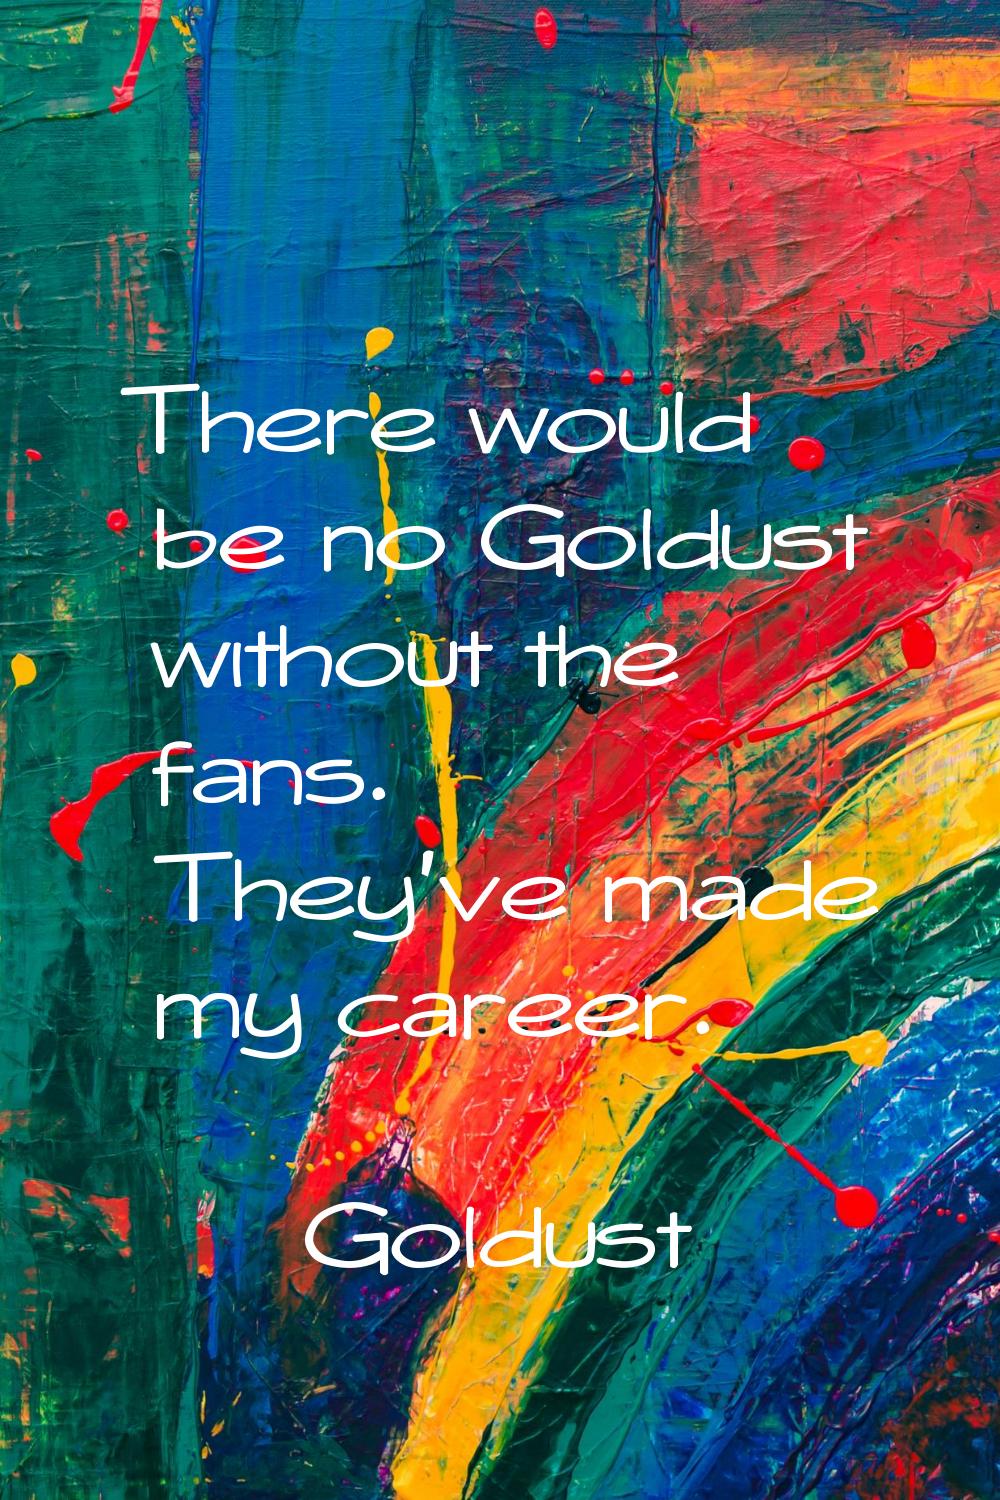 There would be no Goldust without the fans. They've made my career.